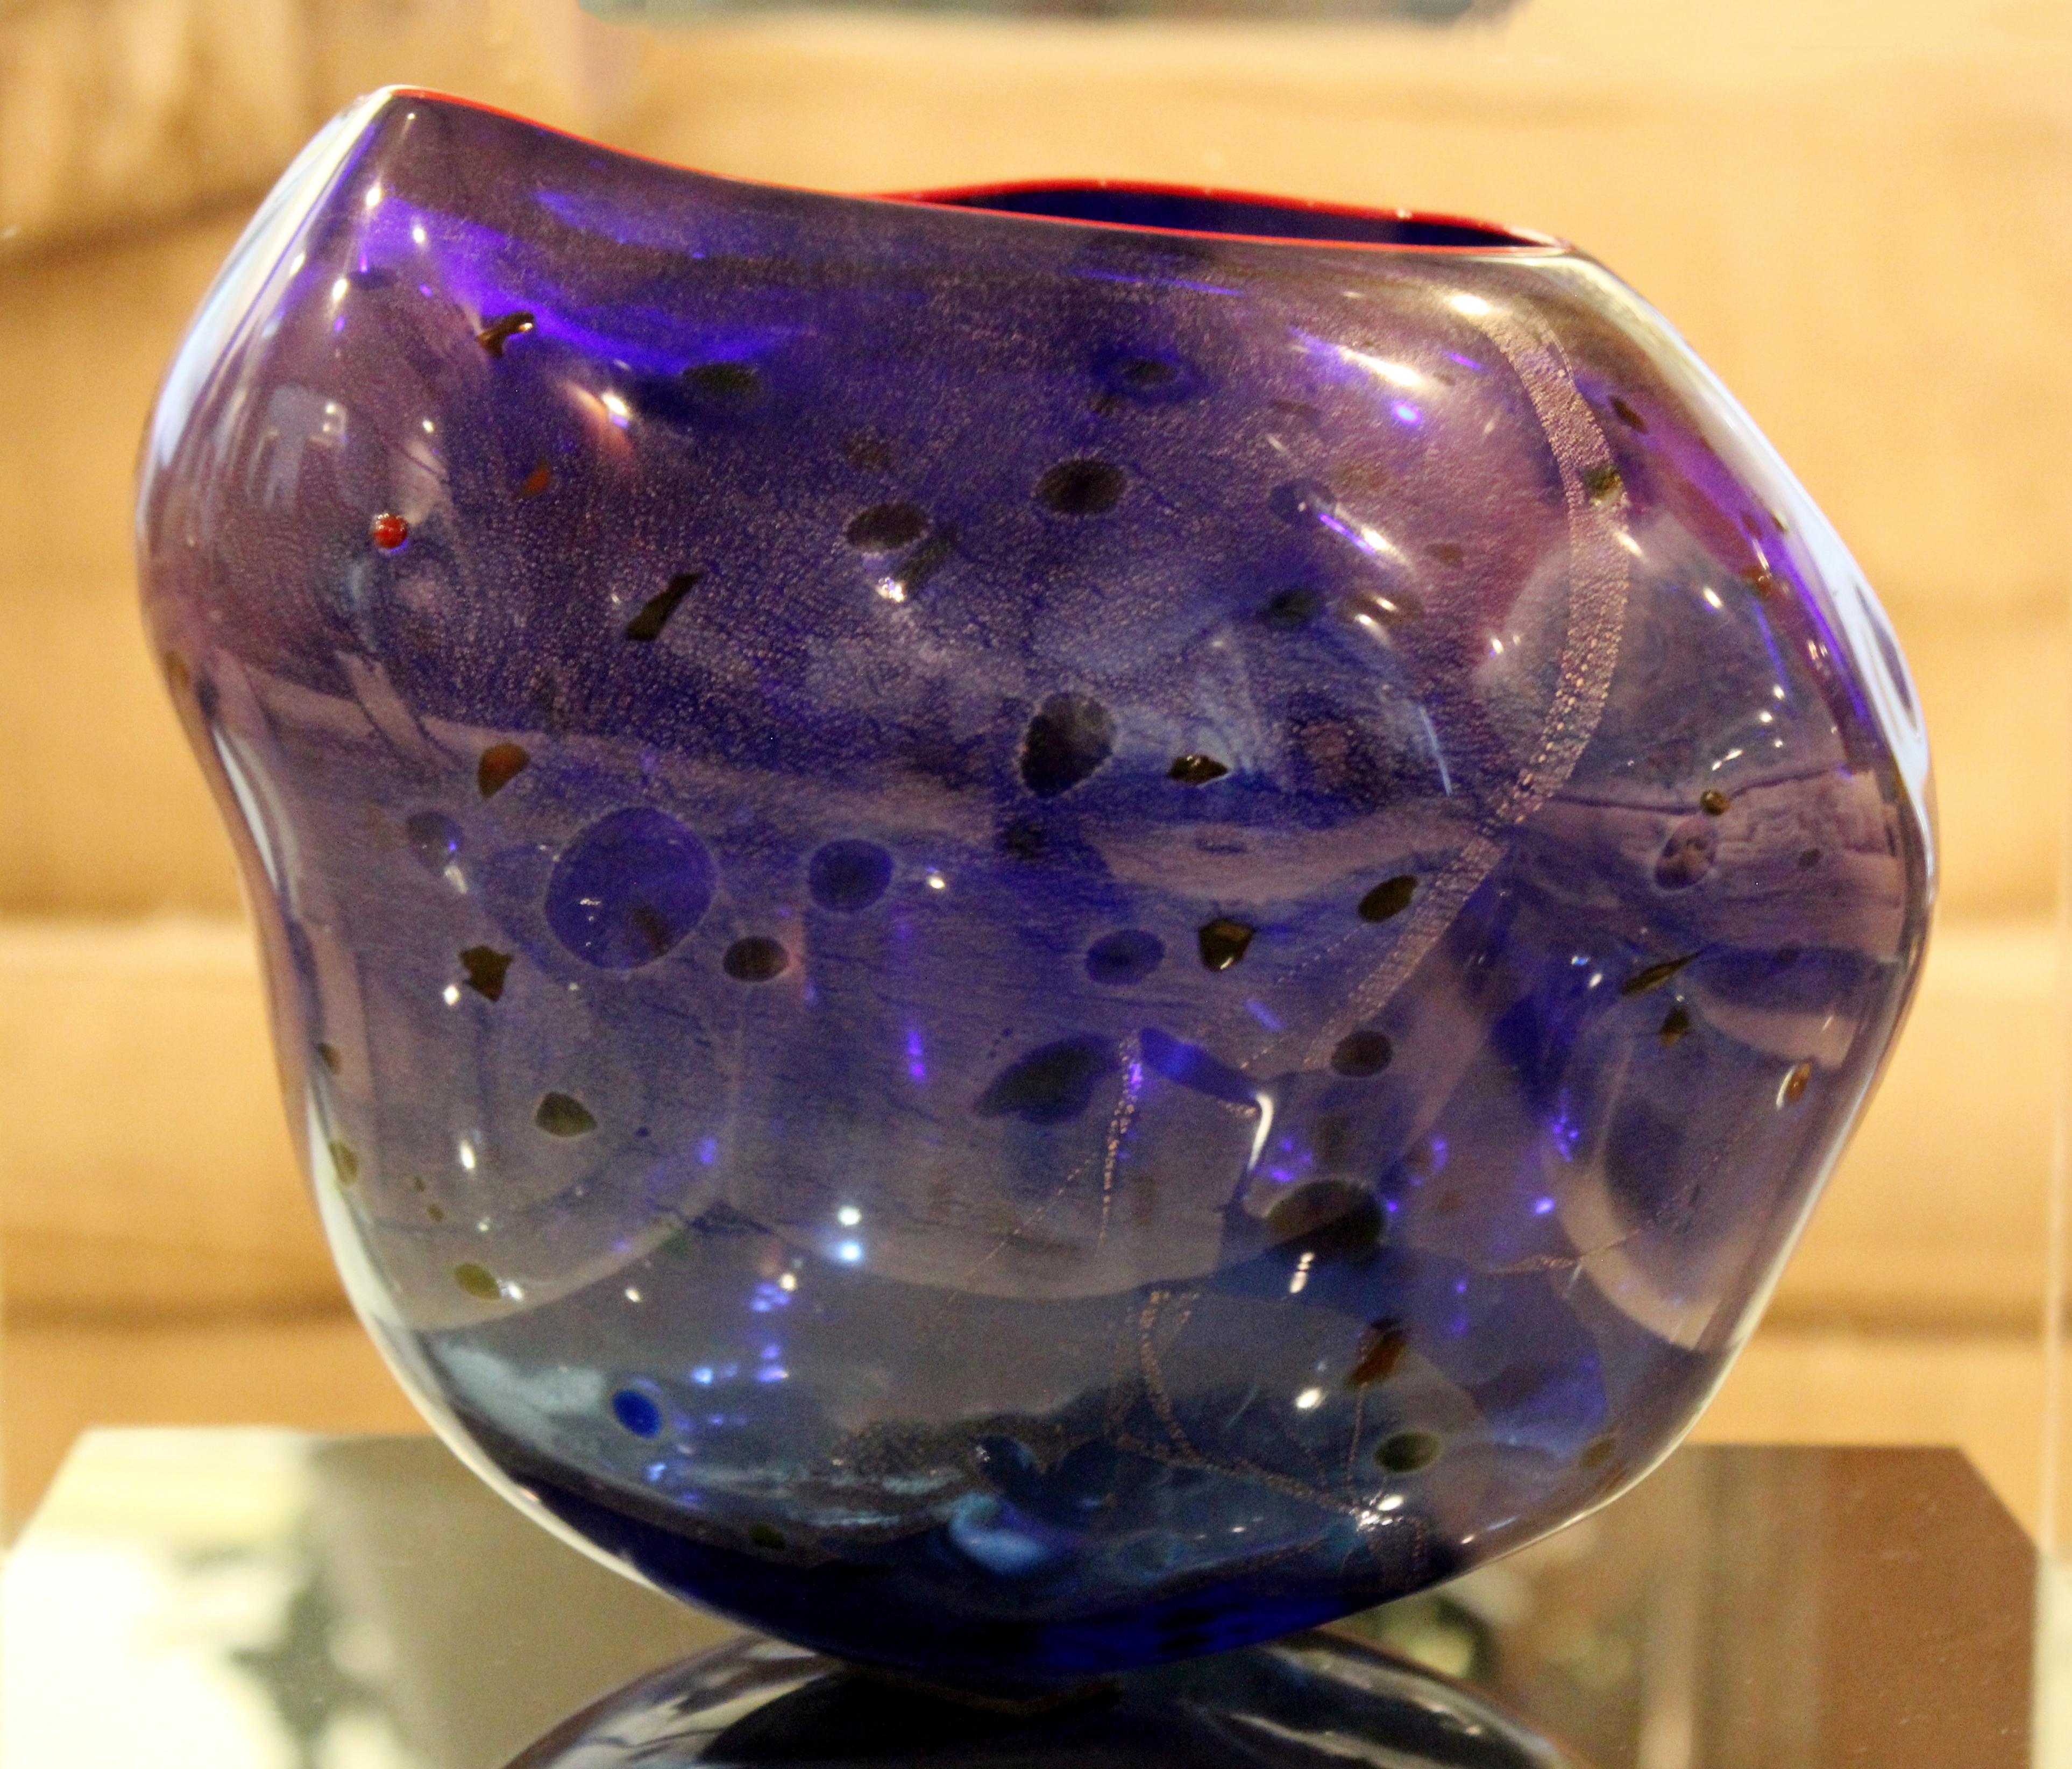 Blown Glass Mid-Century Modern Shell Glass Art Table Sculpture Signed Chihuly 1990s Blue